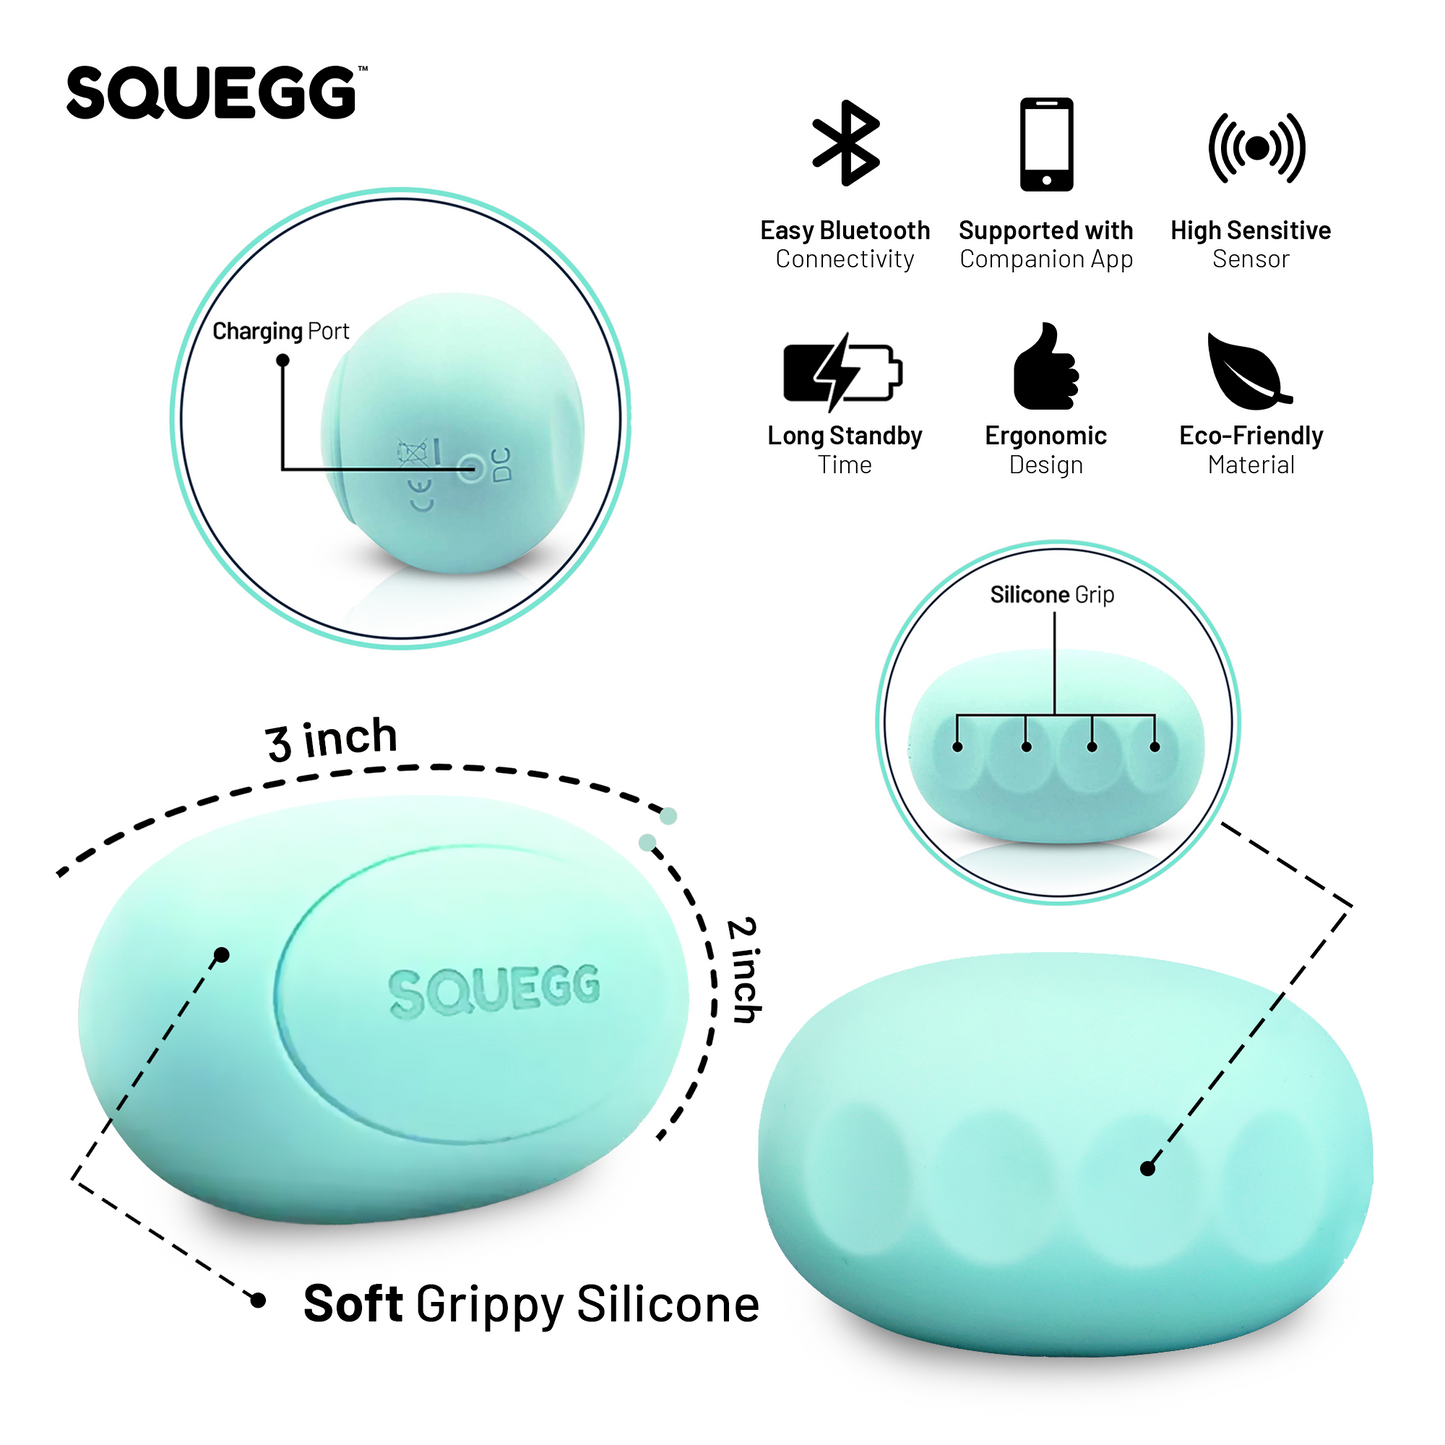 up close view of squegg